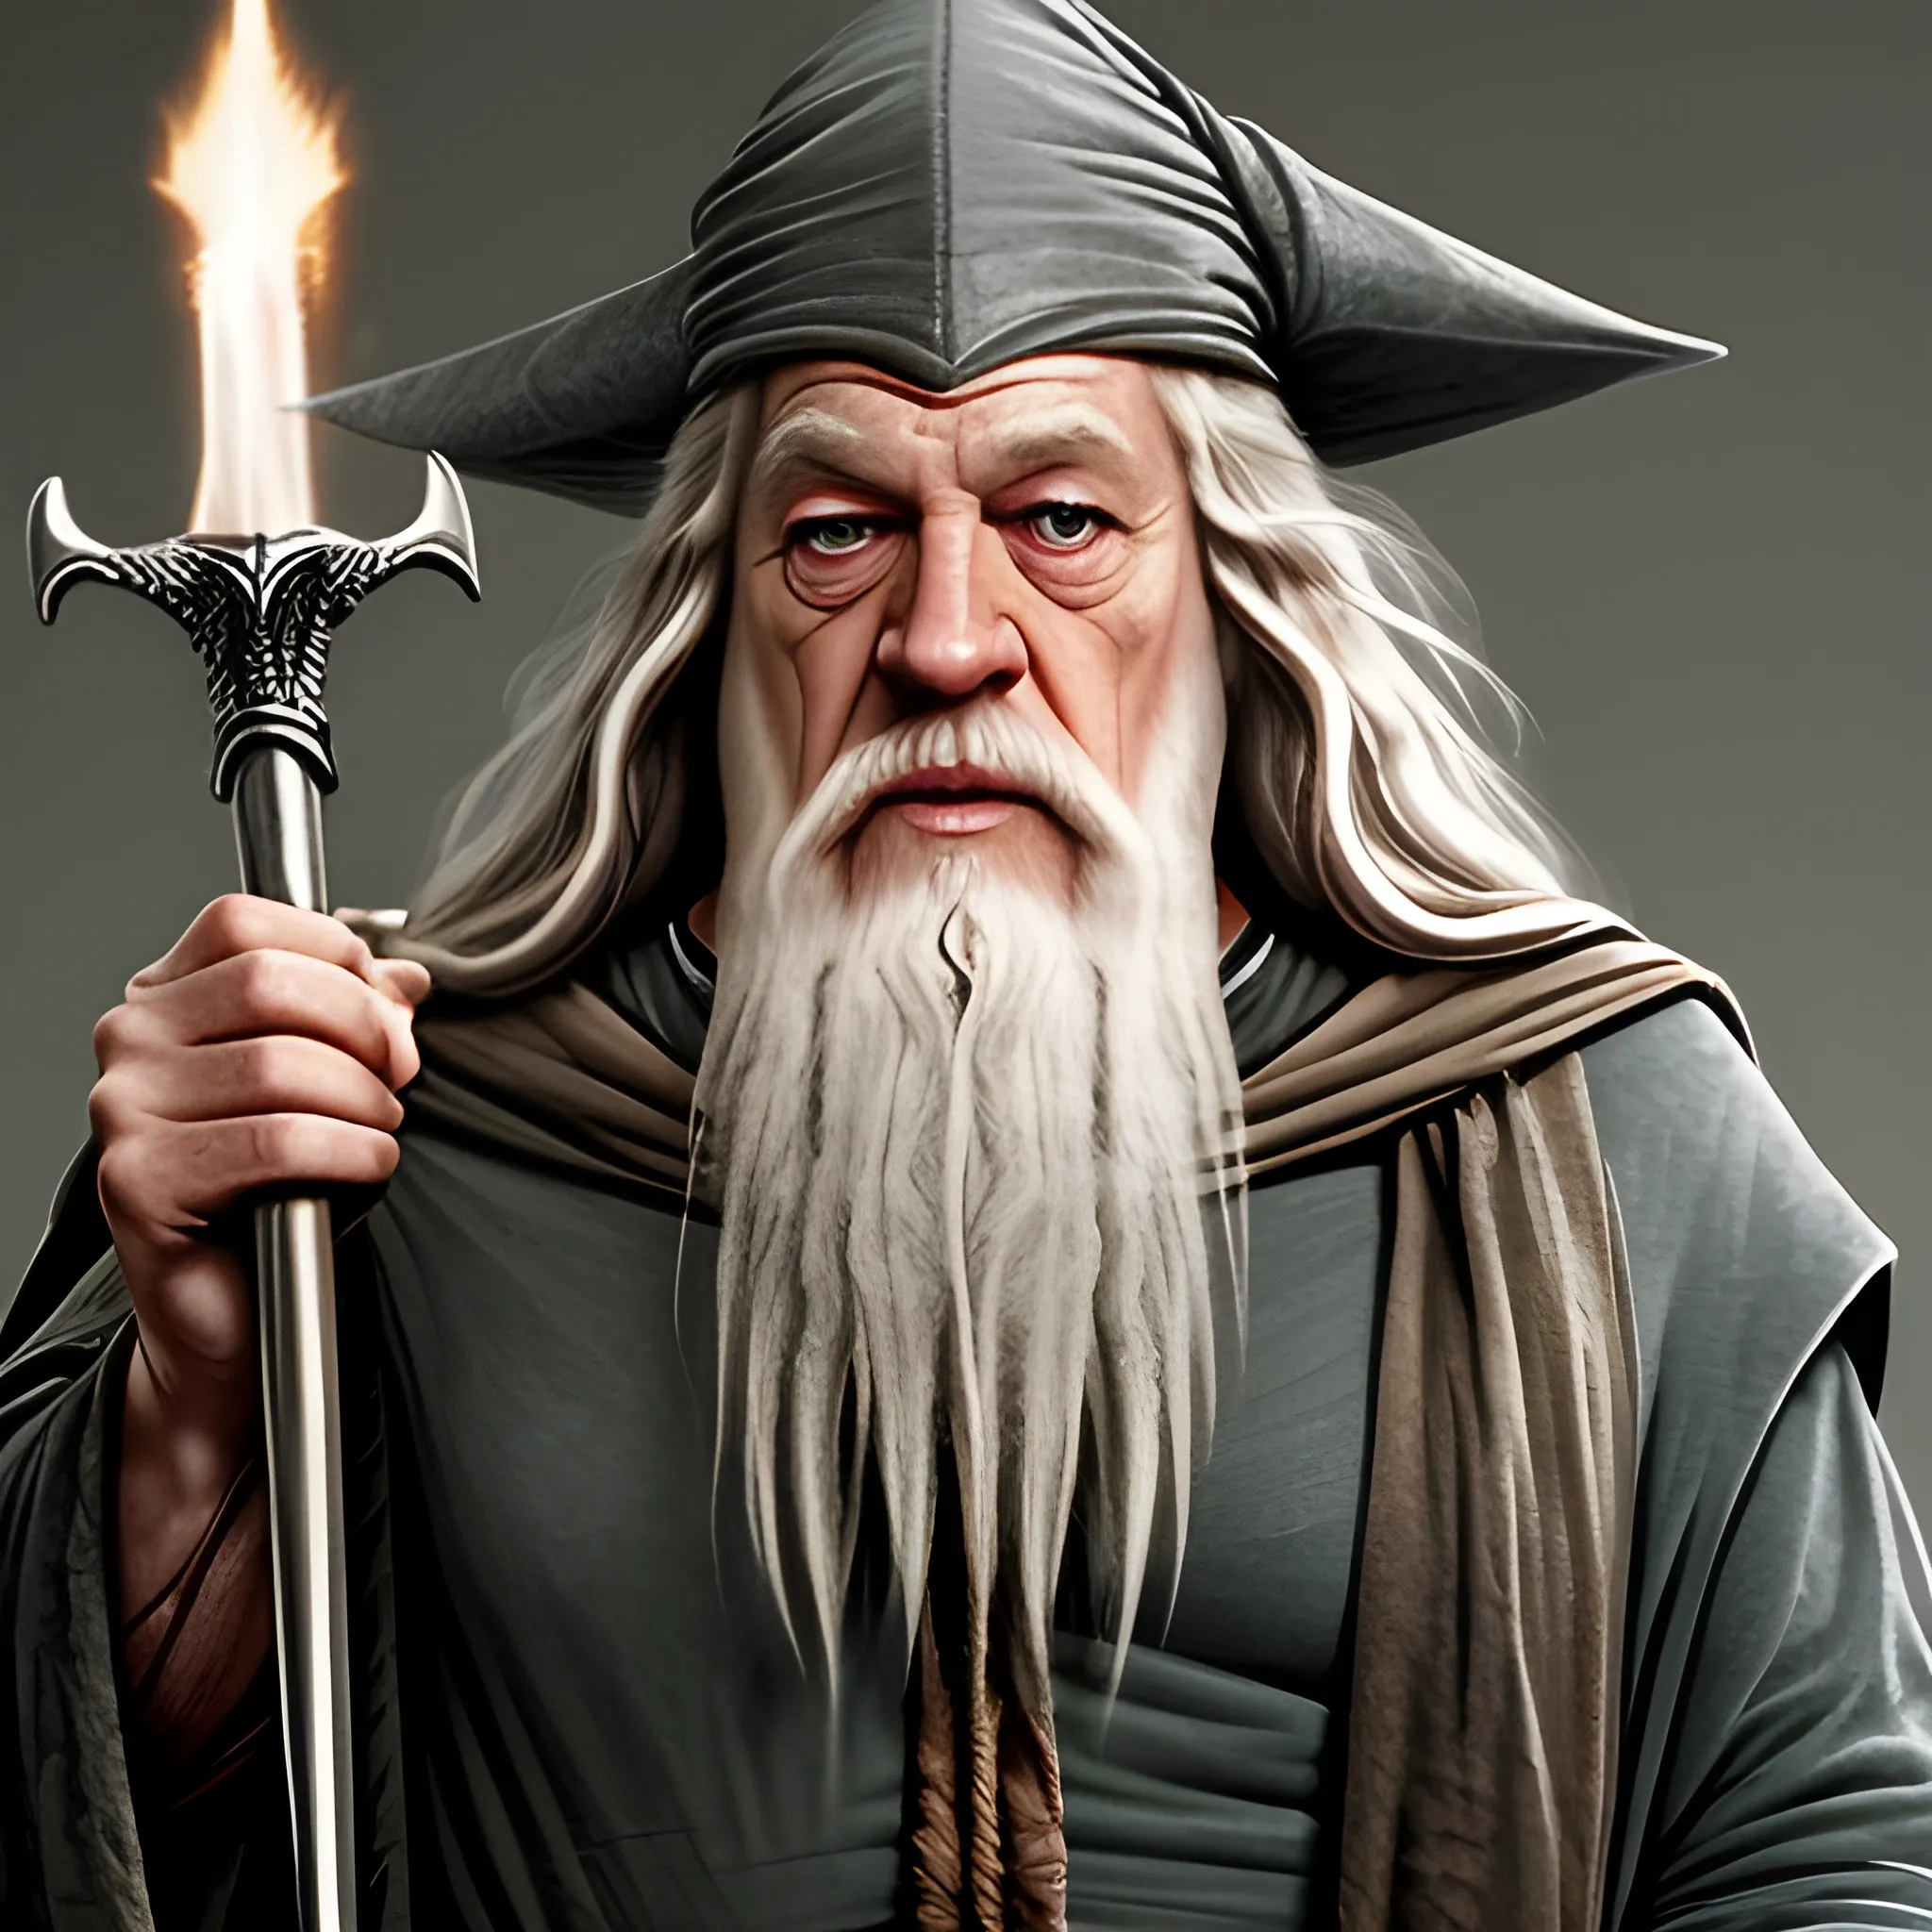 Give me Gandalf from lord of the rings but gigga Chad and very buff
